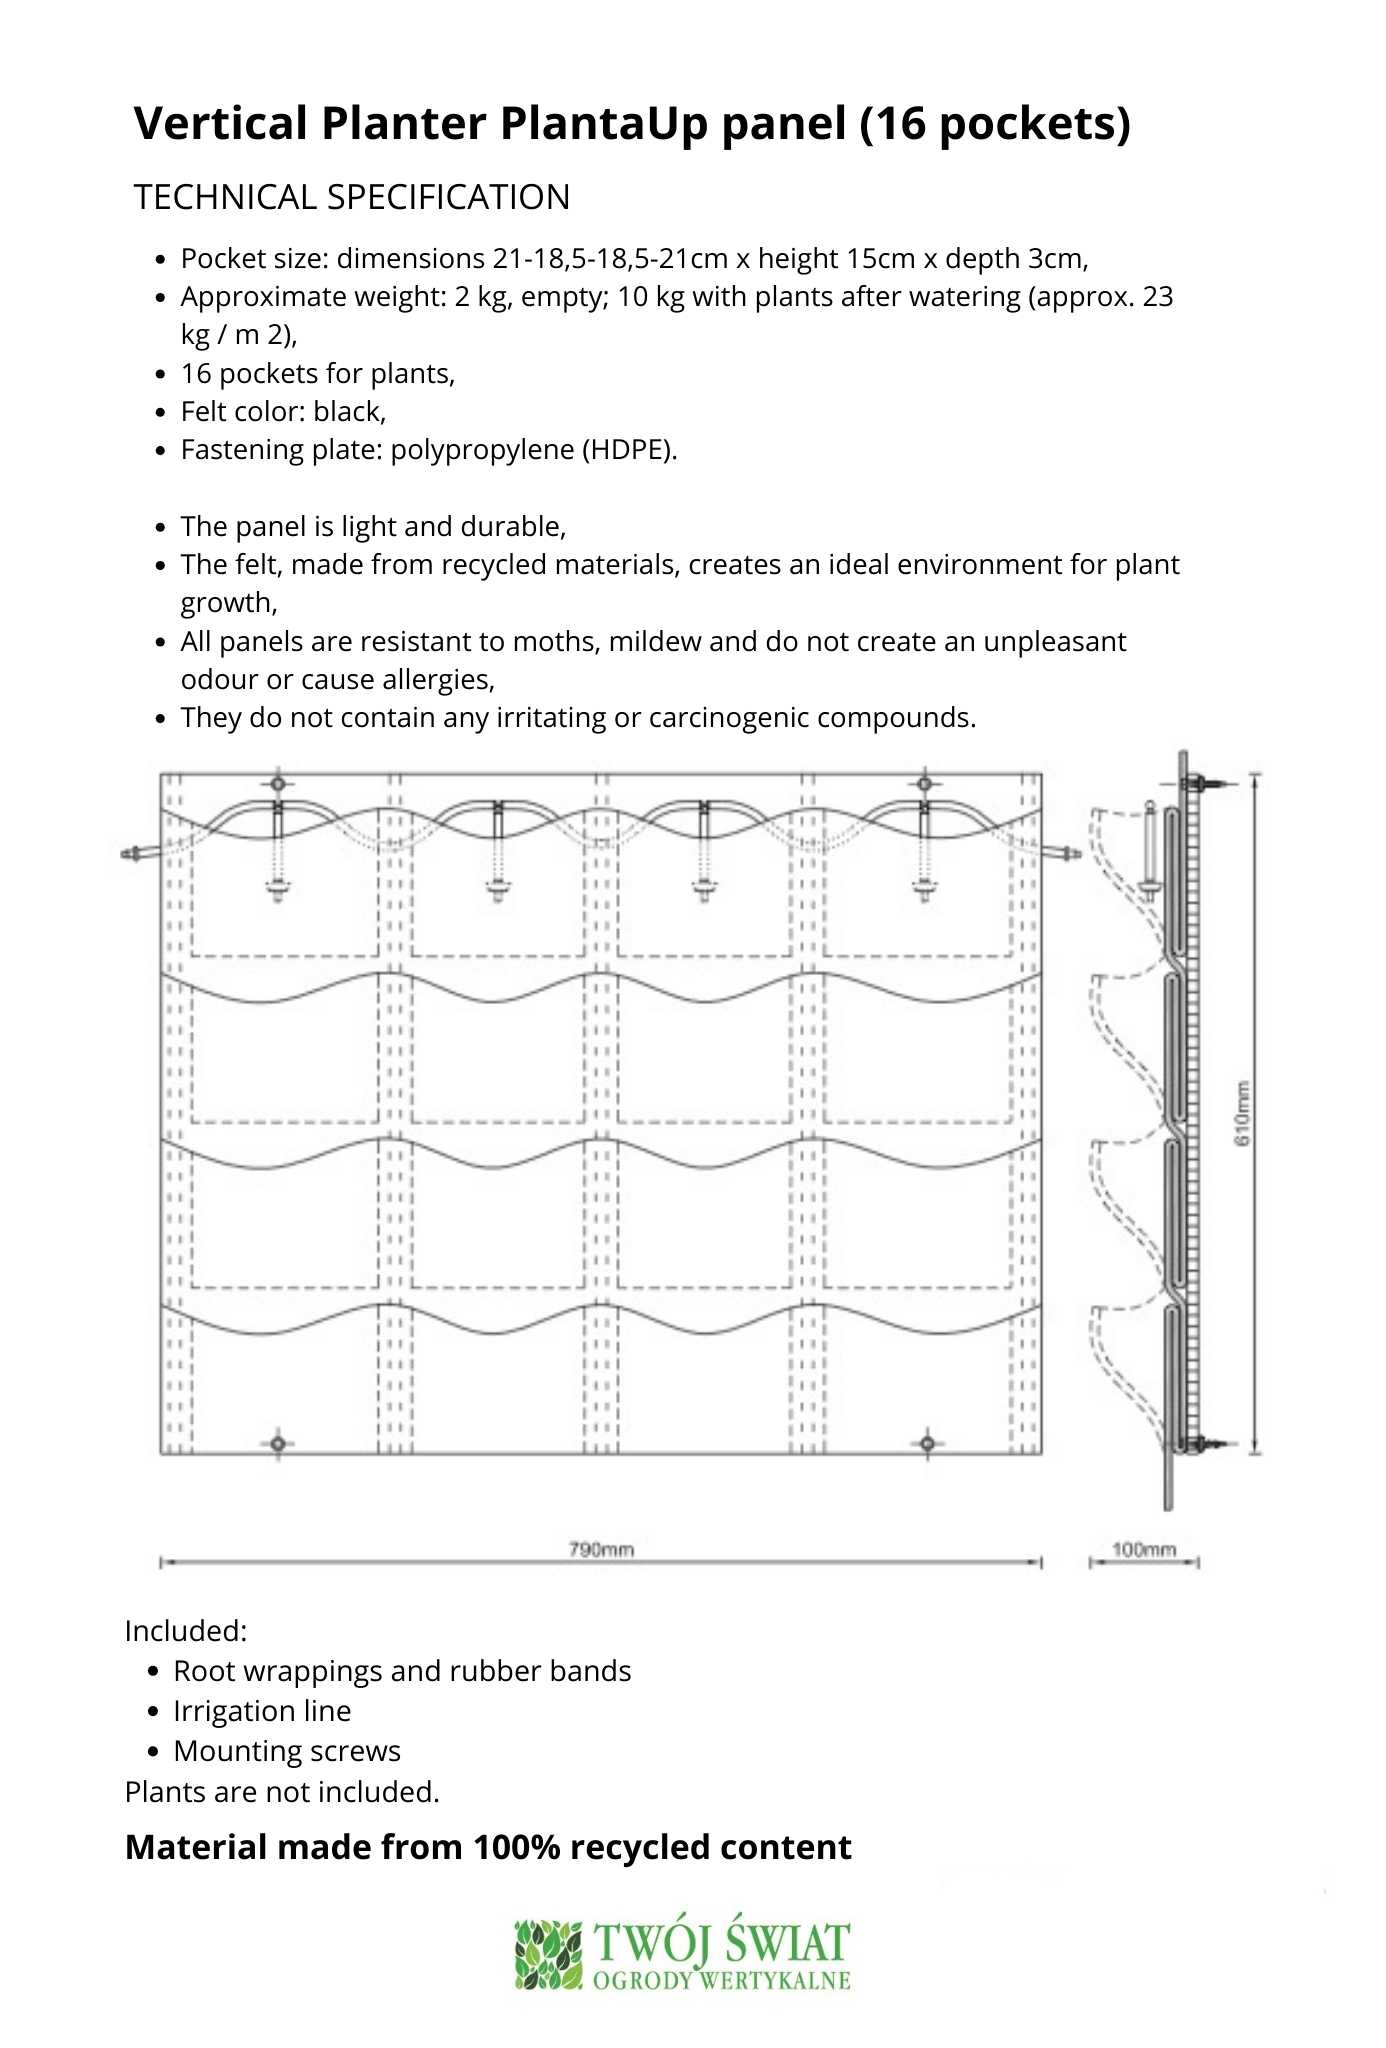 16 pockets Vertical Planter PlantaUp panel - technical specification